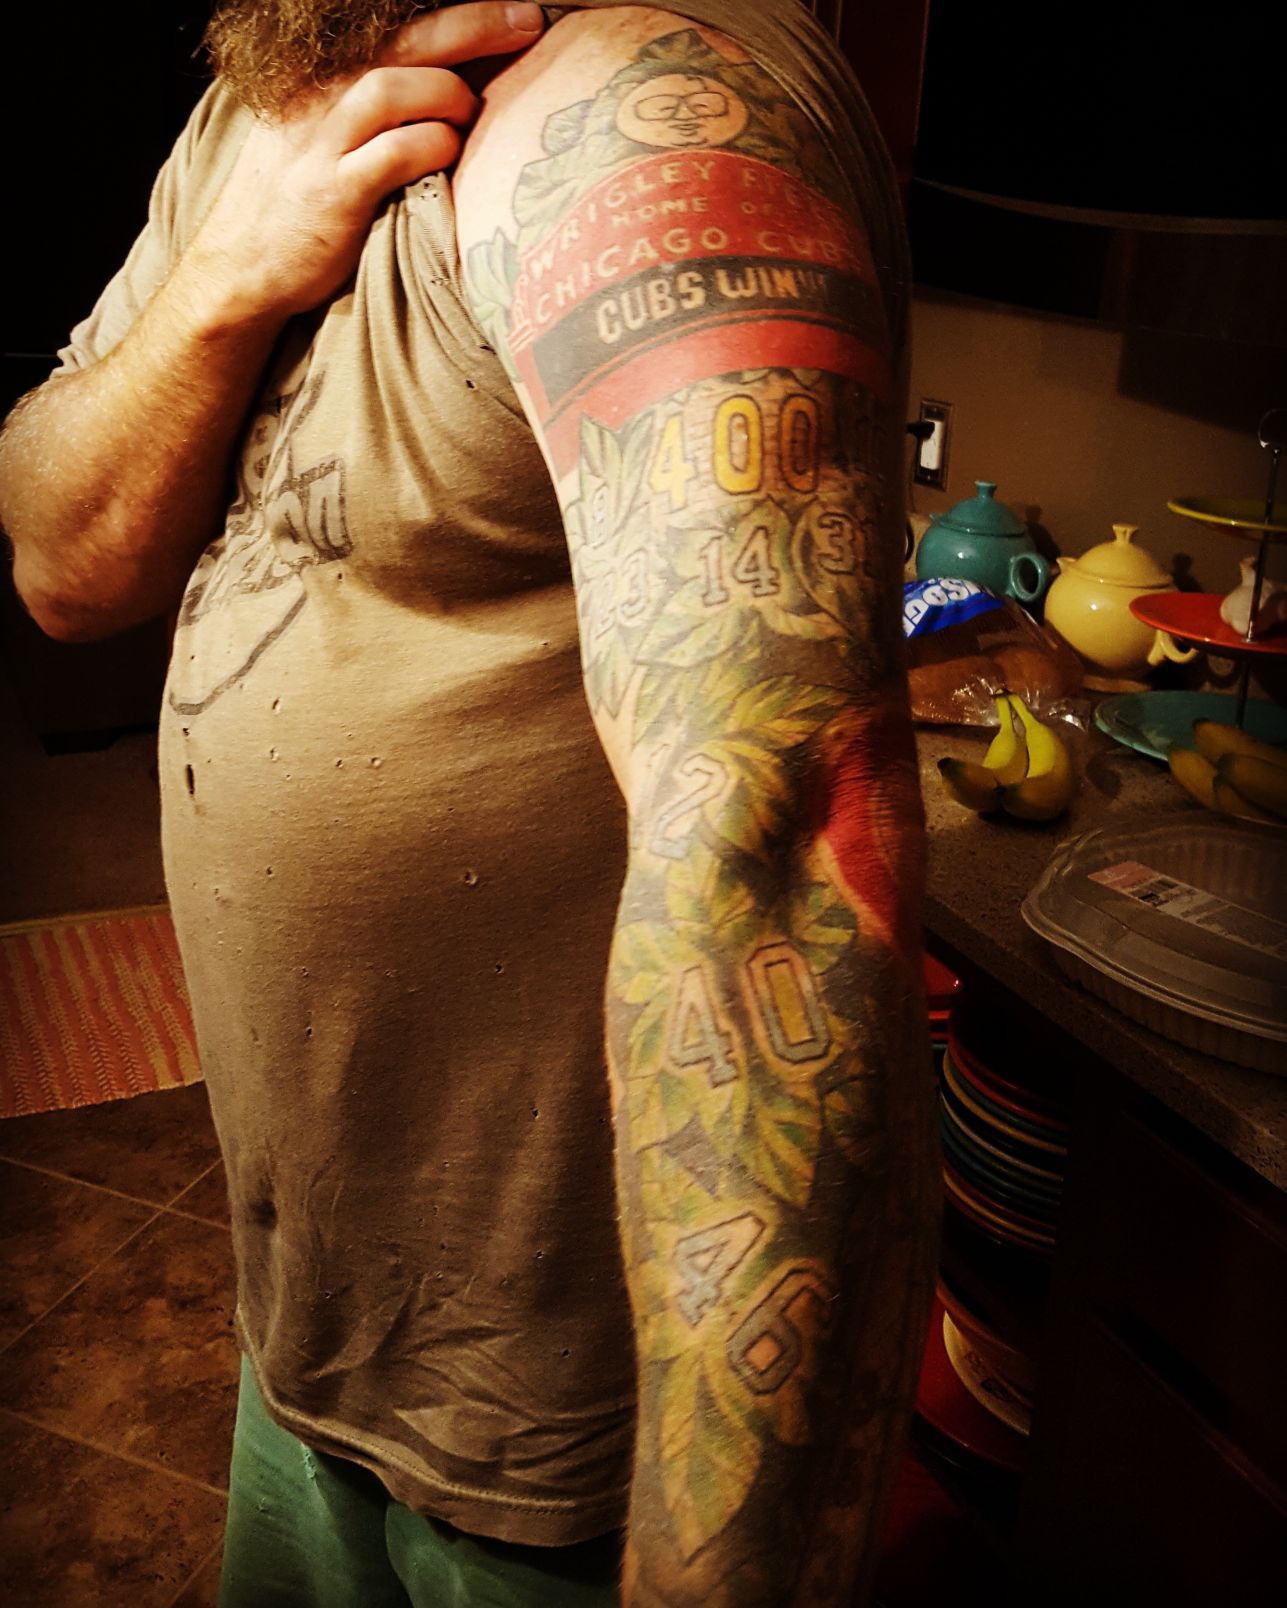 Share more than 81 frank american pickers tattoos super hot  thtantai2